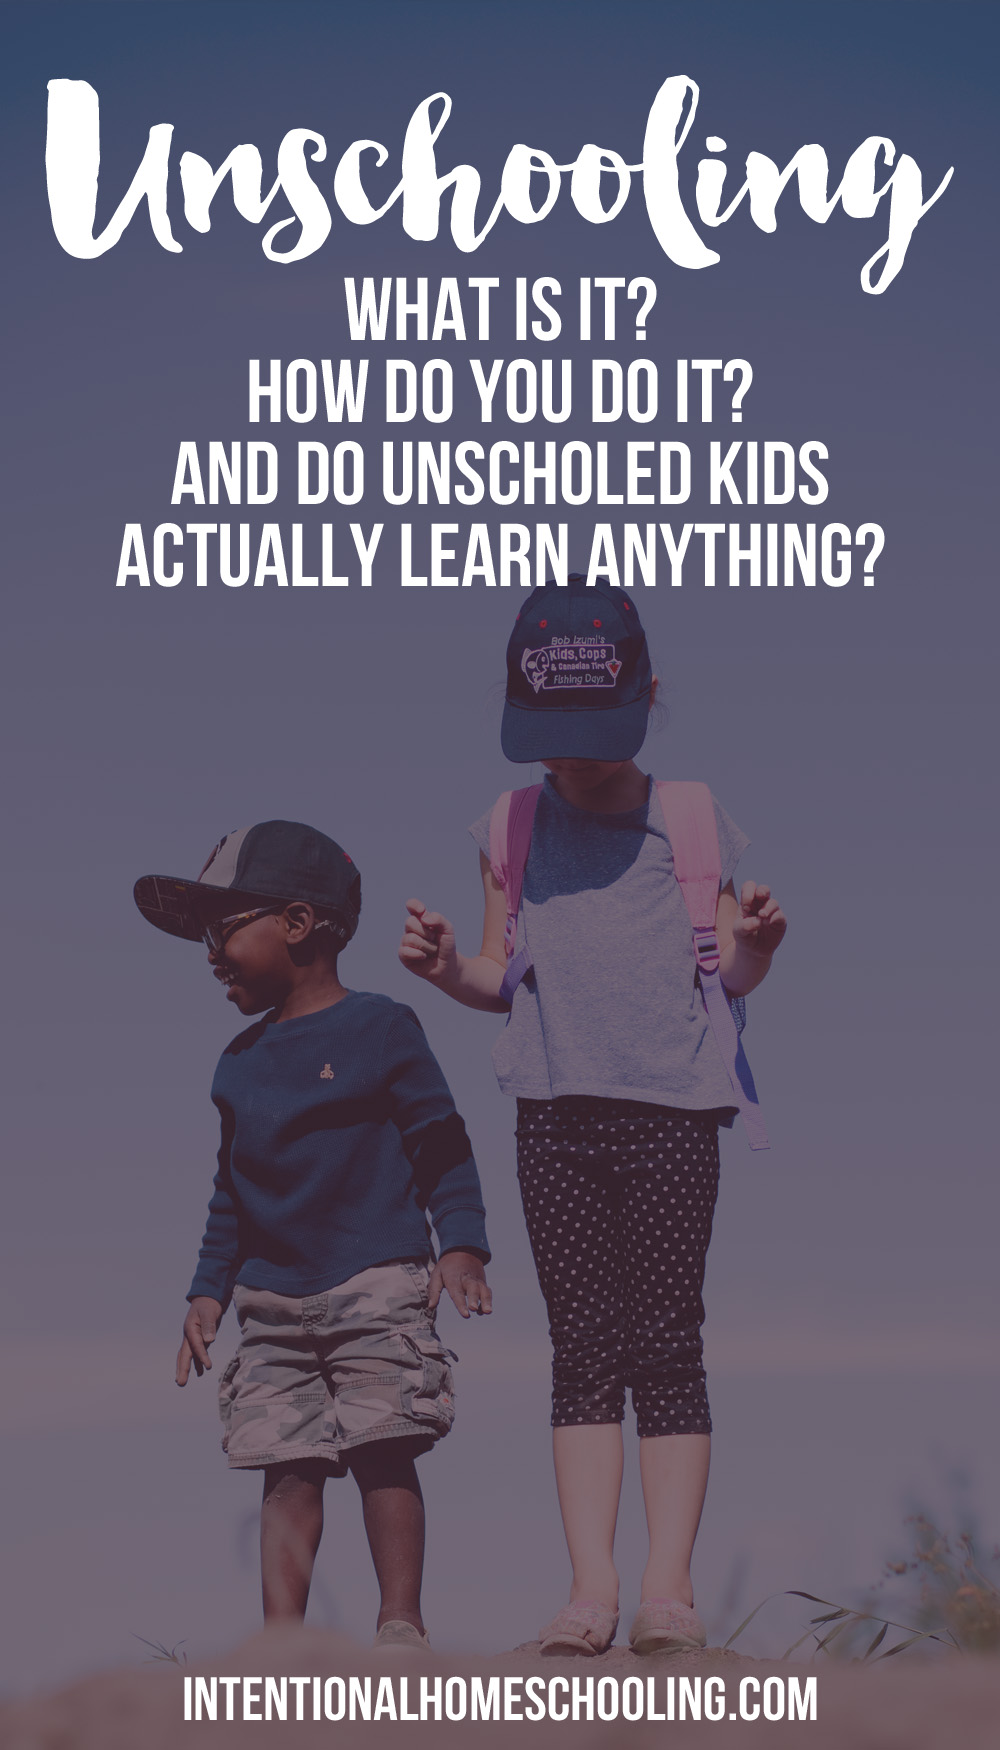 Unschooling - what is it, how do you do it and do unschooled kids actually learn anything?